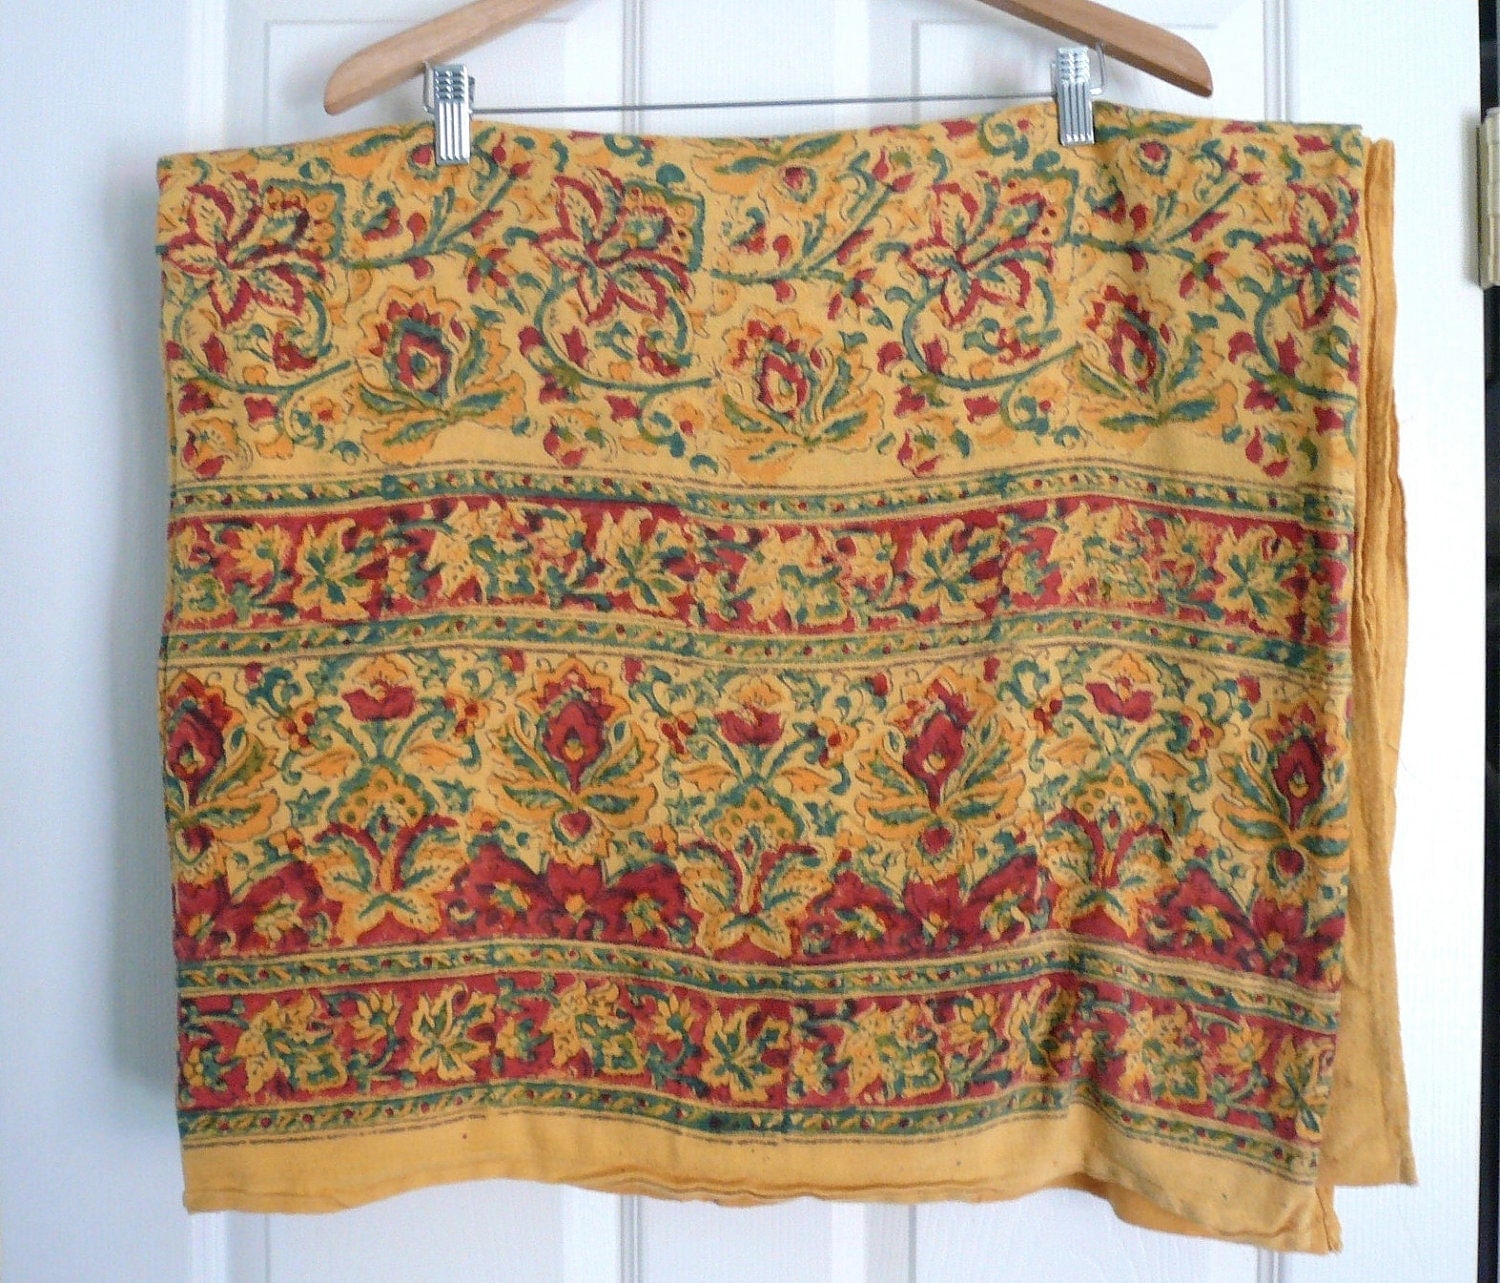 Vintage 1960s Hippie Bedspread Indian Print or Curtain Panel